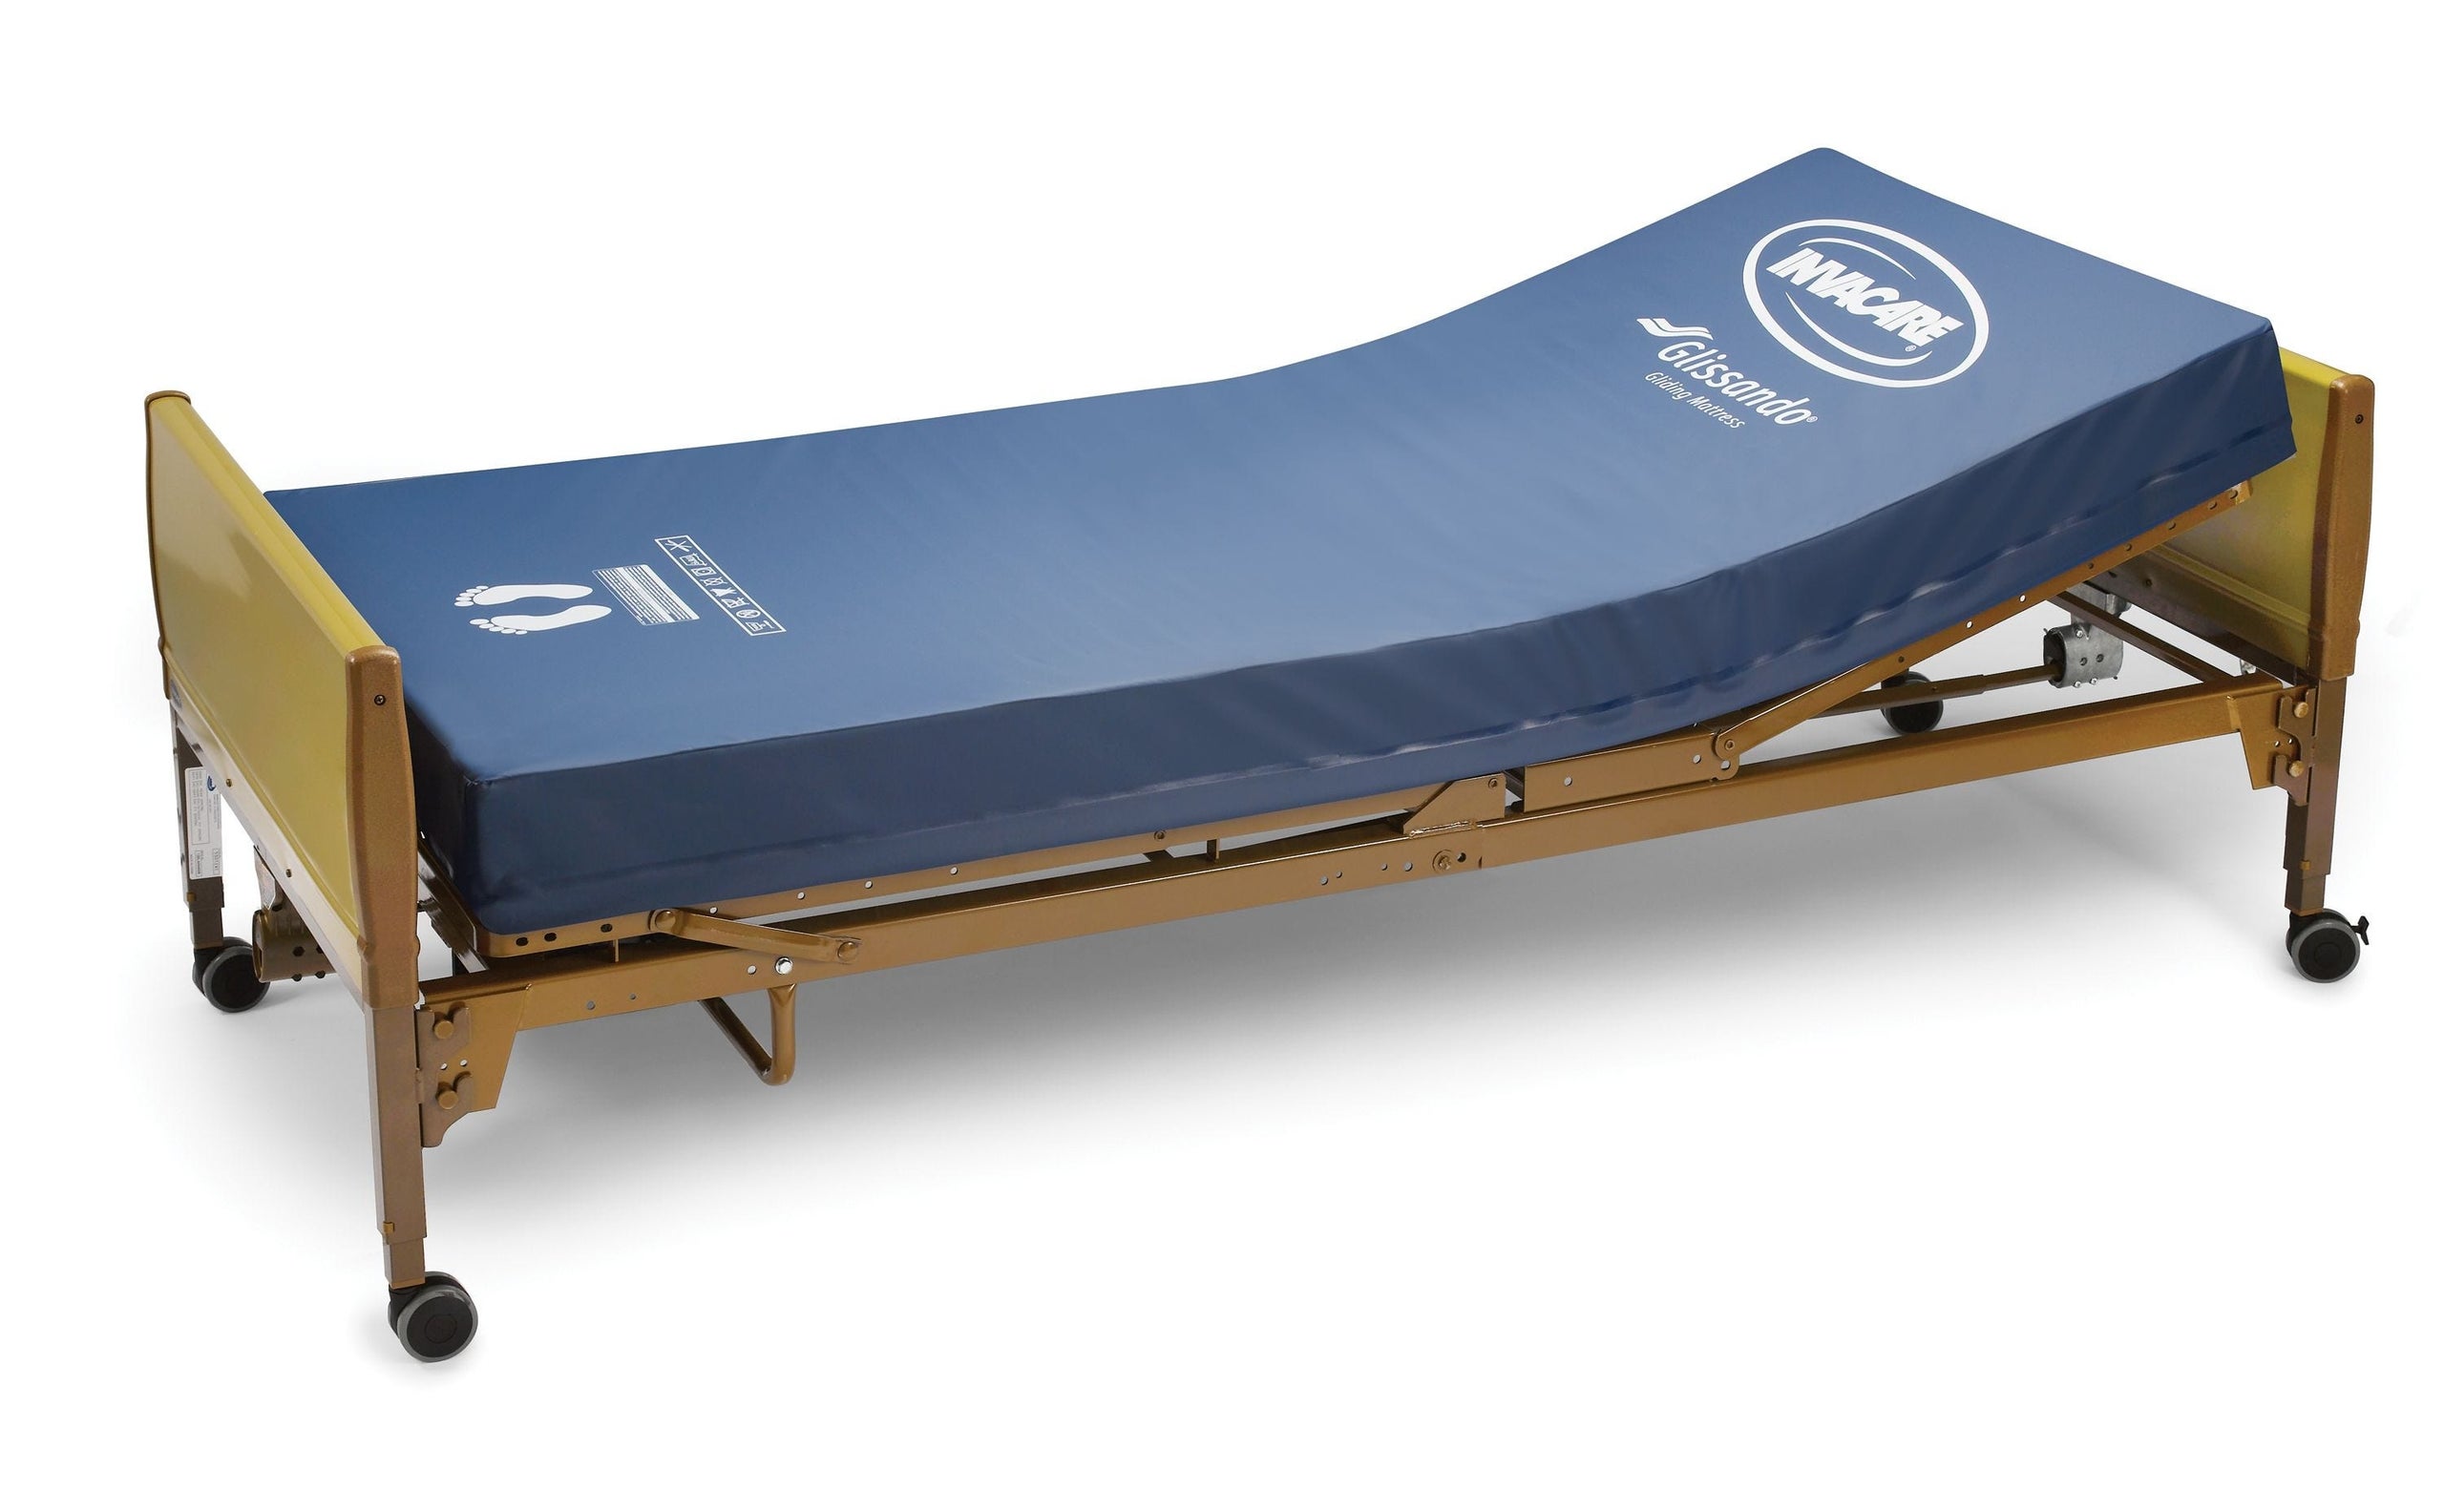 Uncover 50+ Stunning invacare solace therapy foam mattress Trend Of The Year